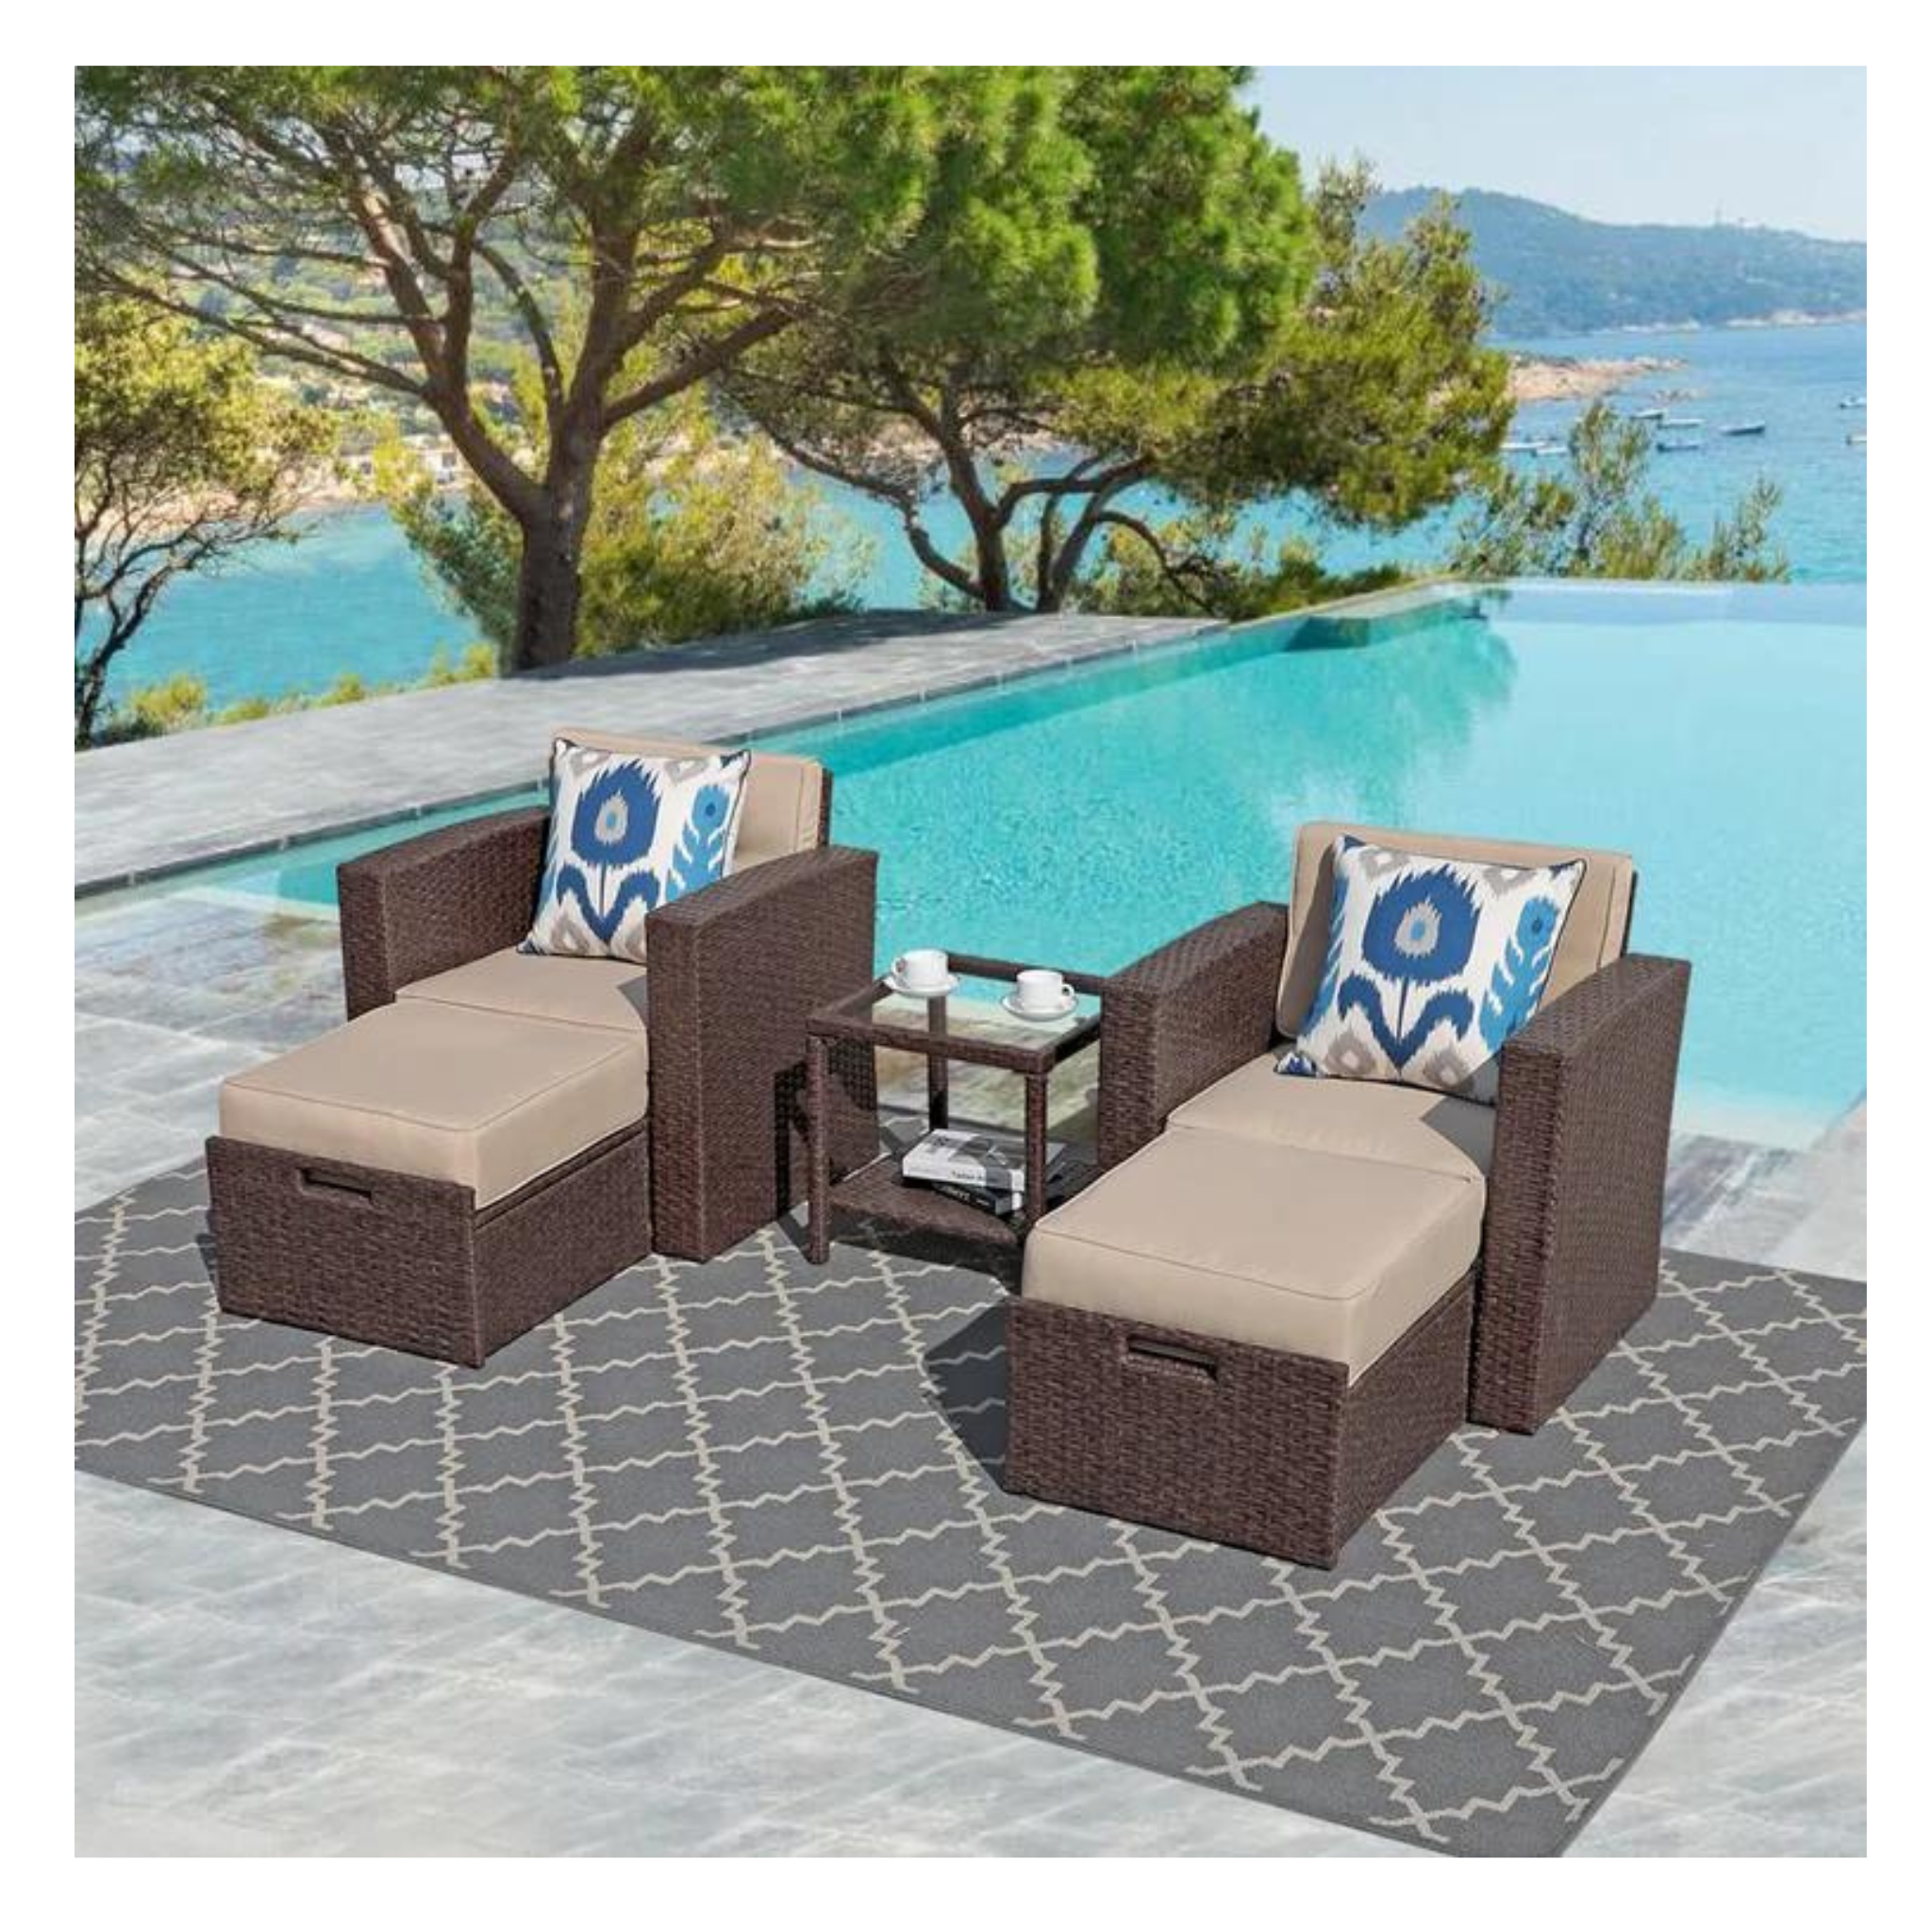 Eutropio 2 Person Outdoor Seating Group with Cushions